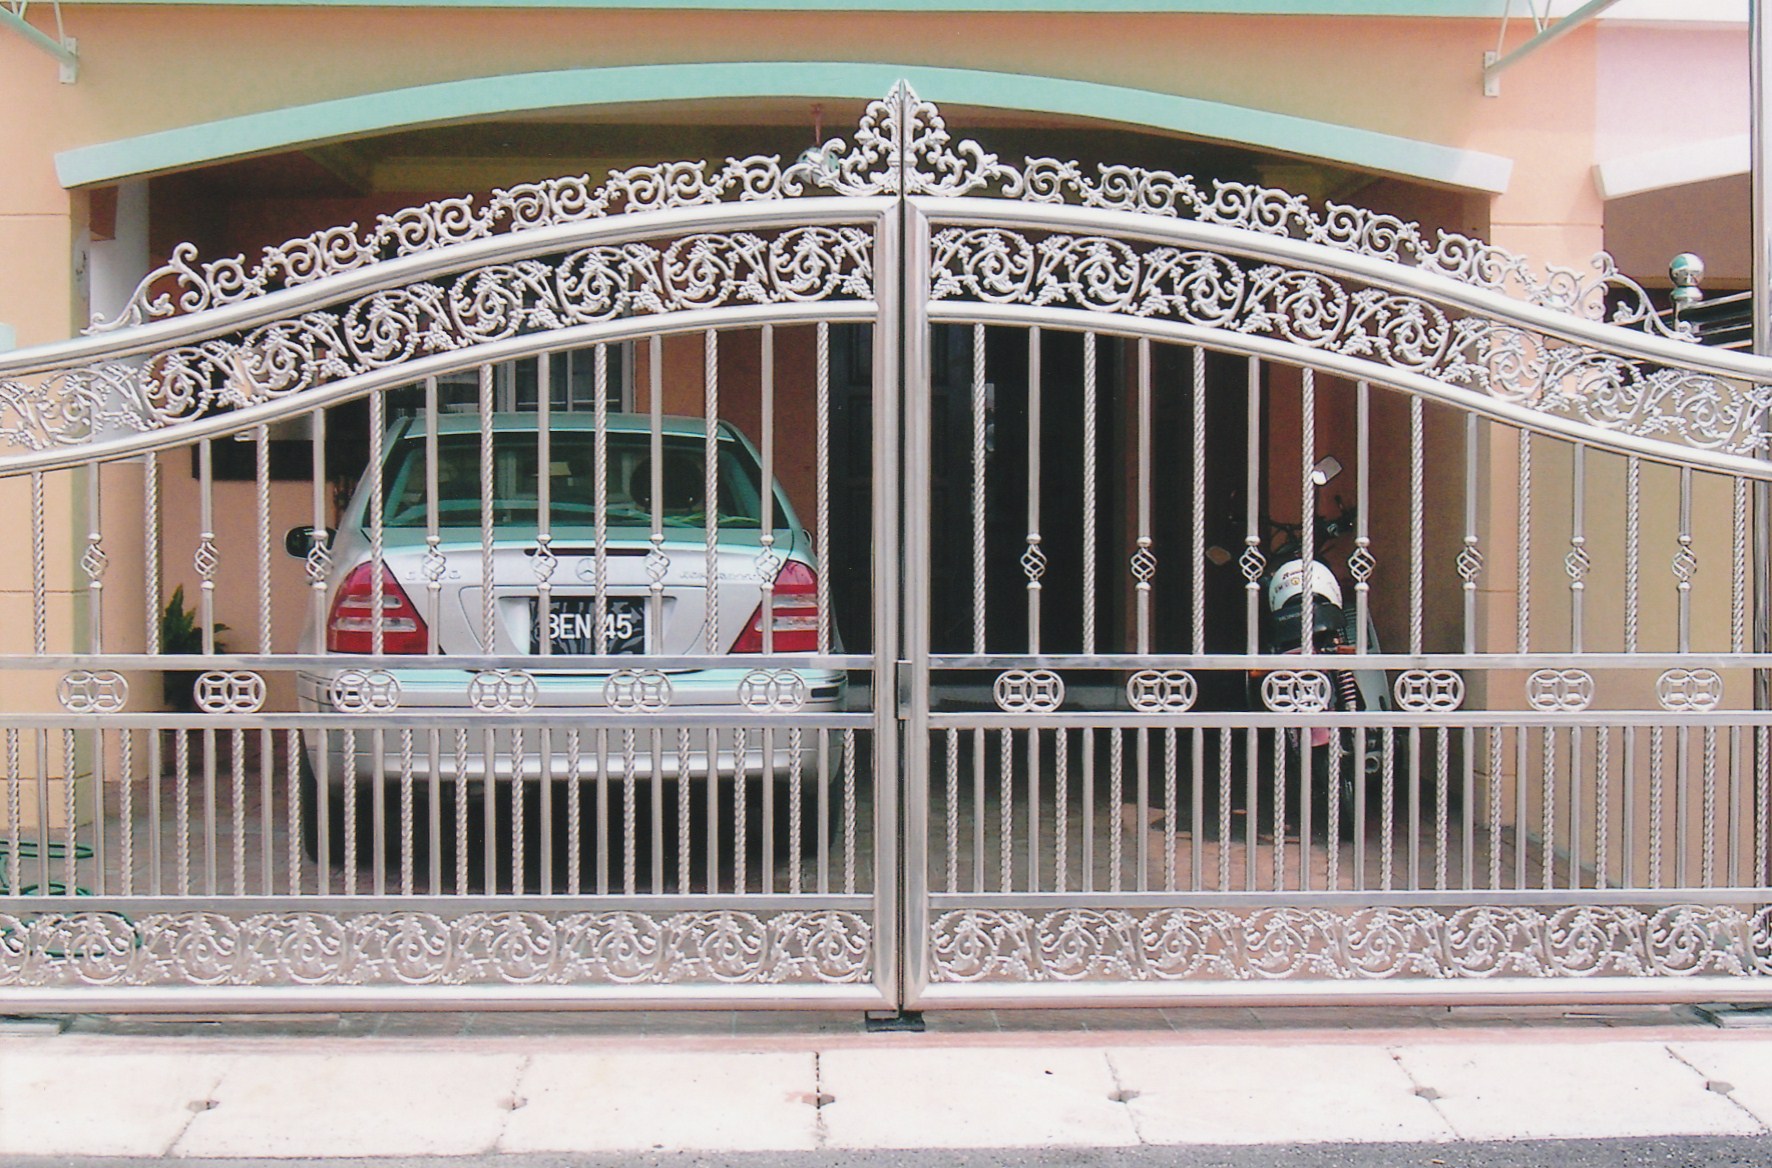 Stainless Steel Entrance Gate 12